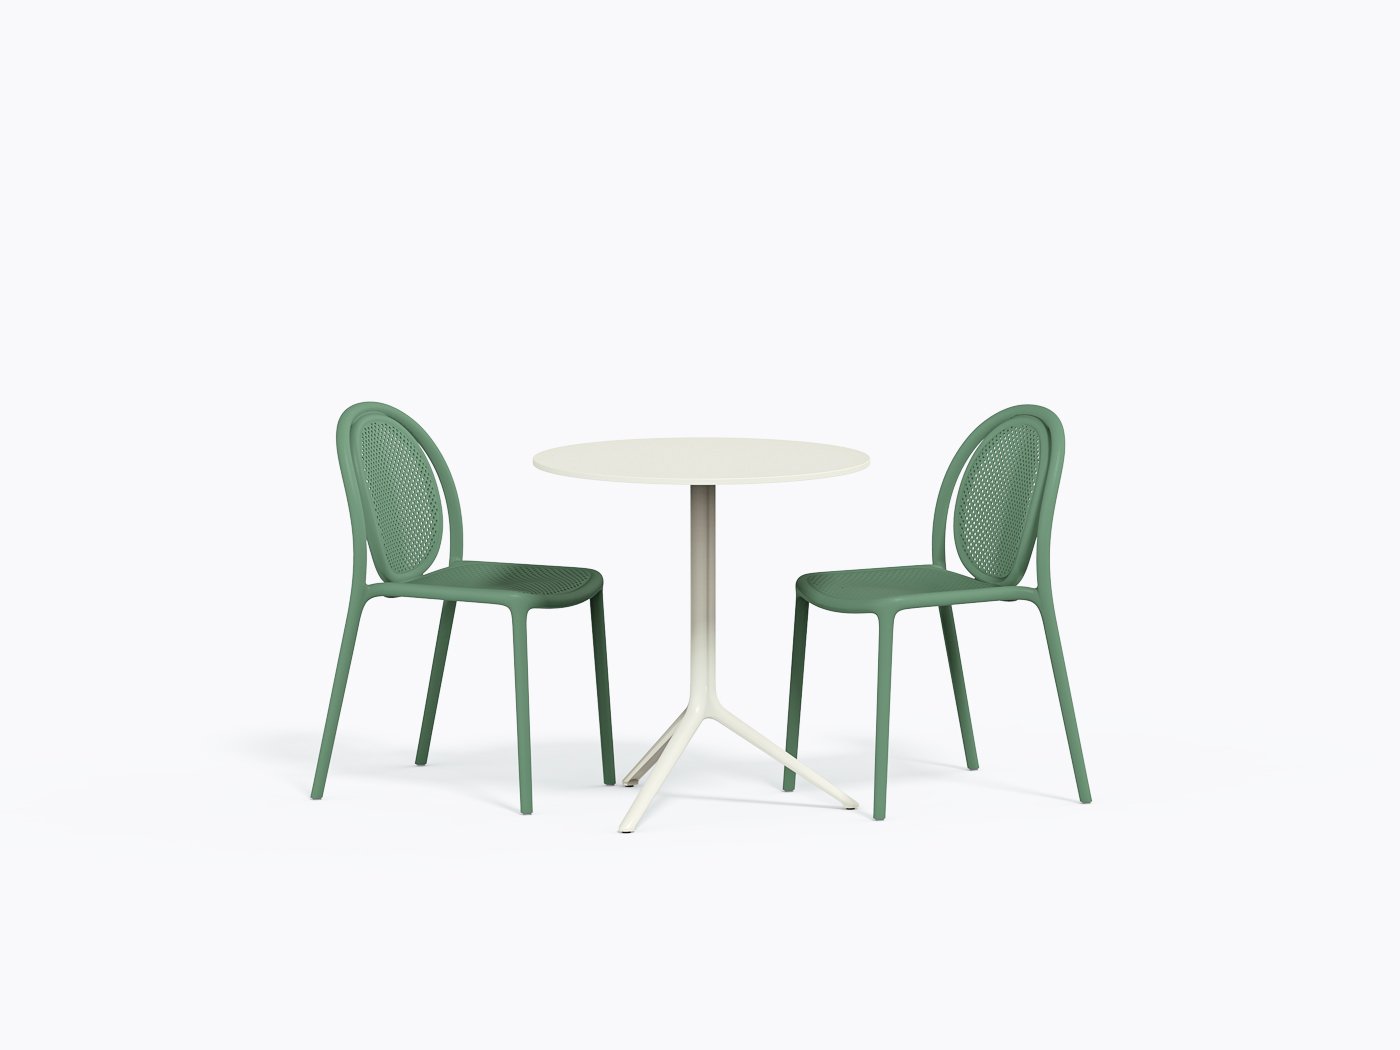 Remind Bundle - 2 Chairs - Green VE